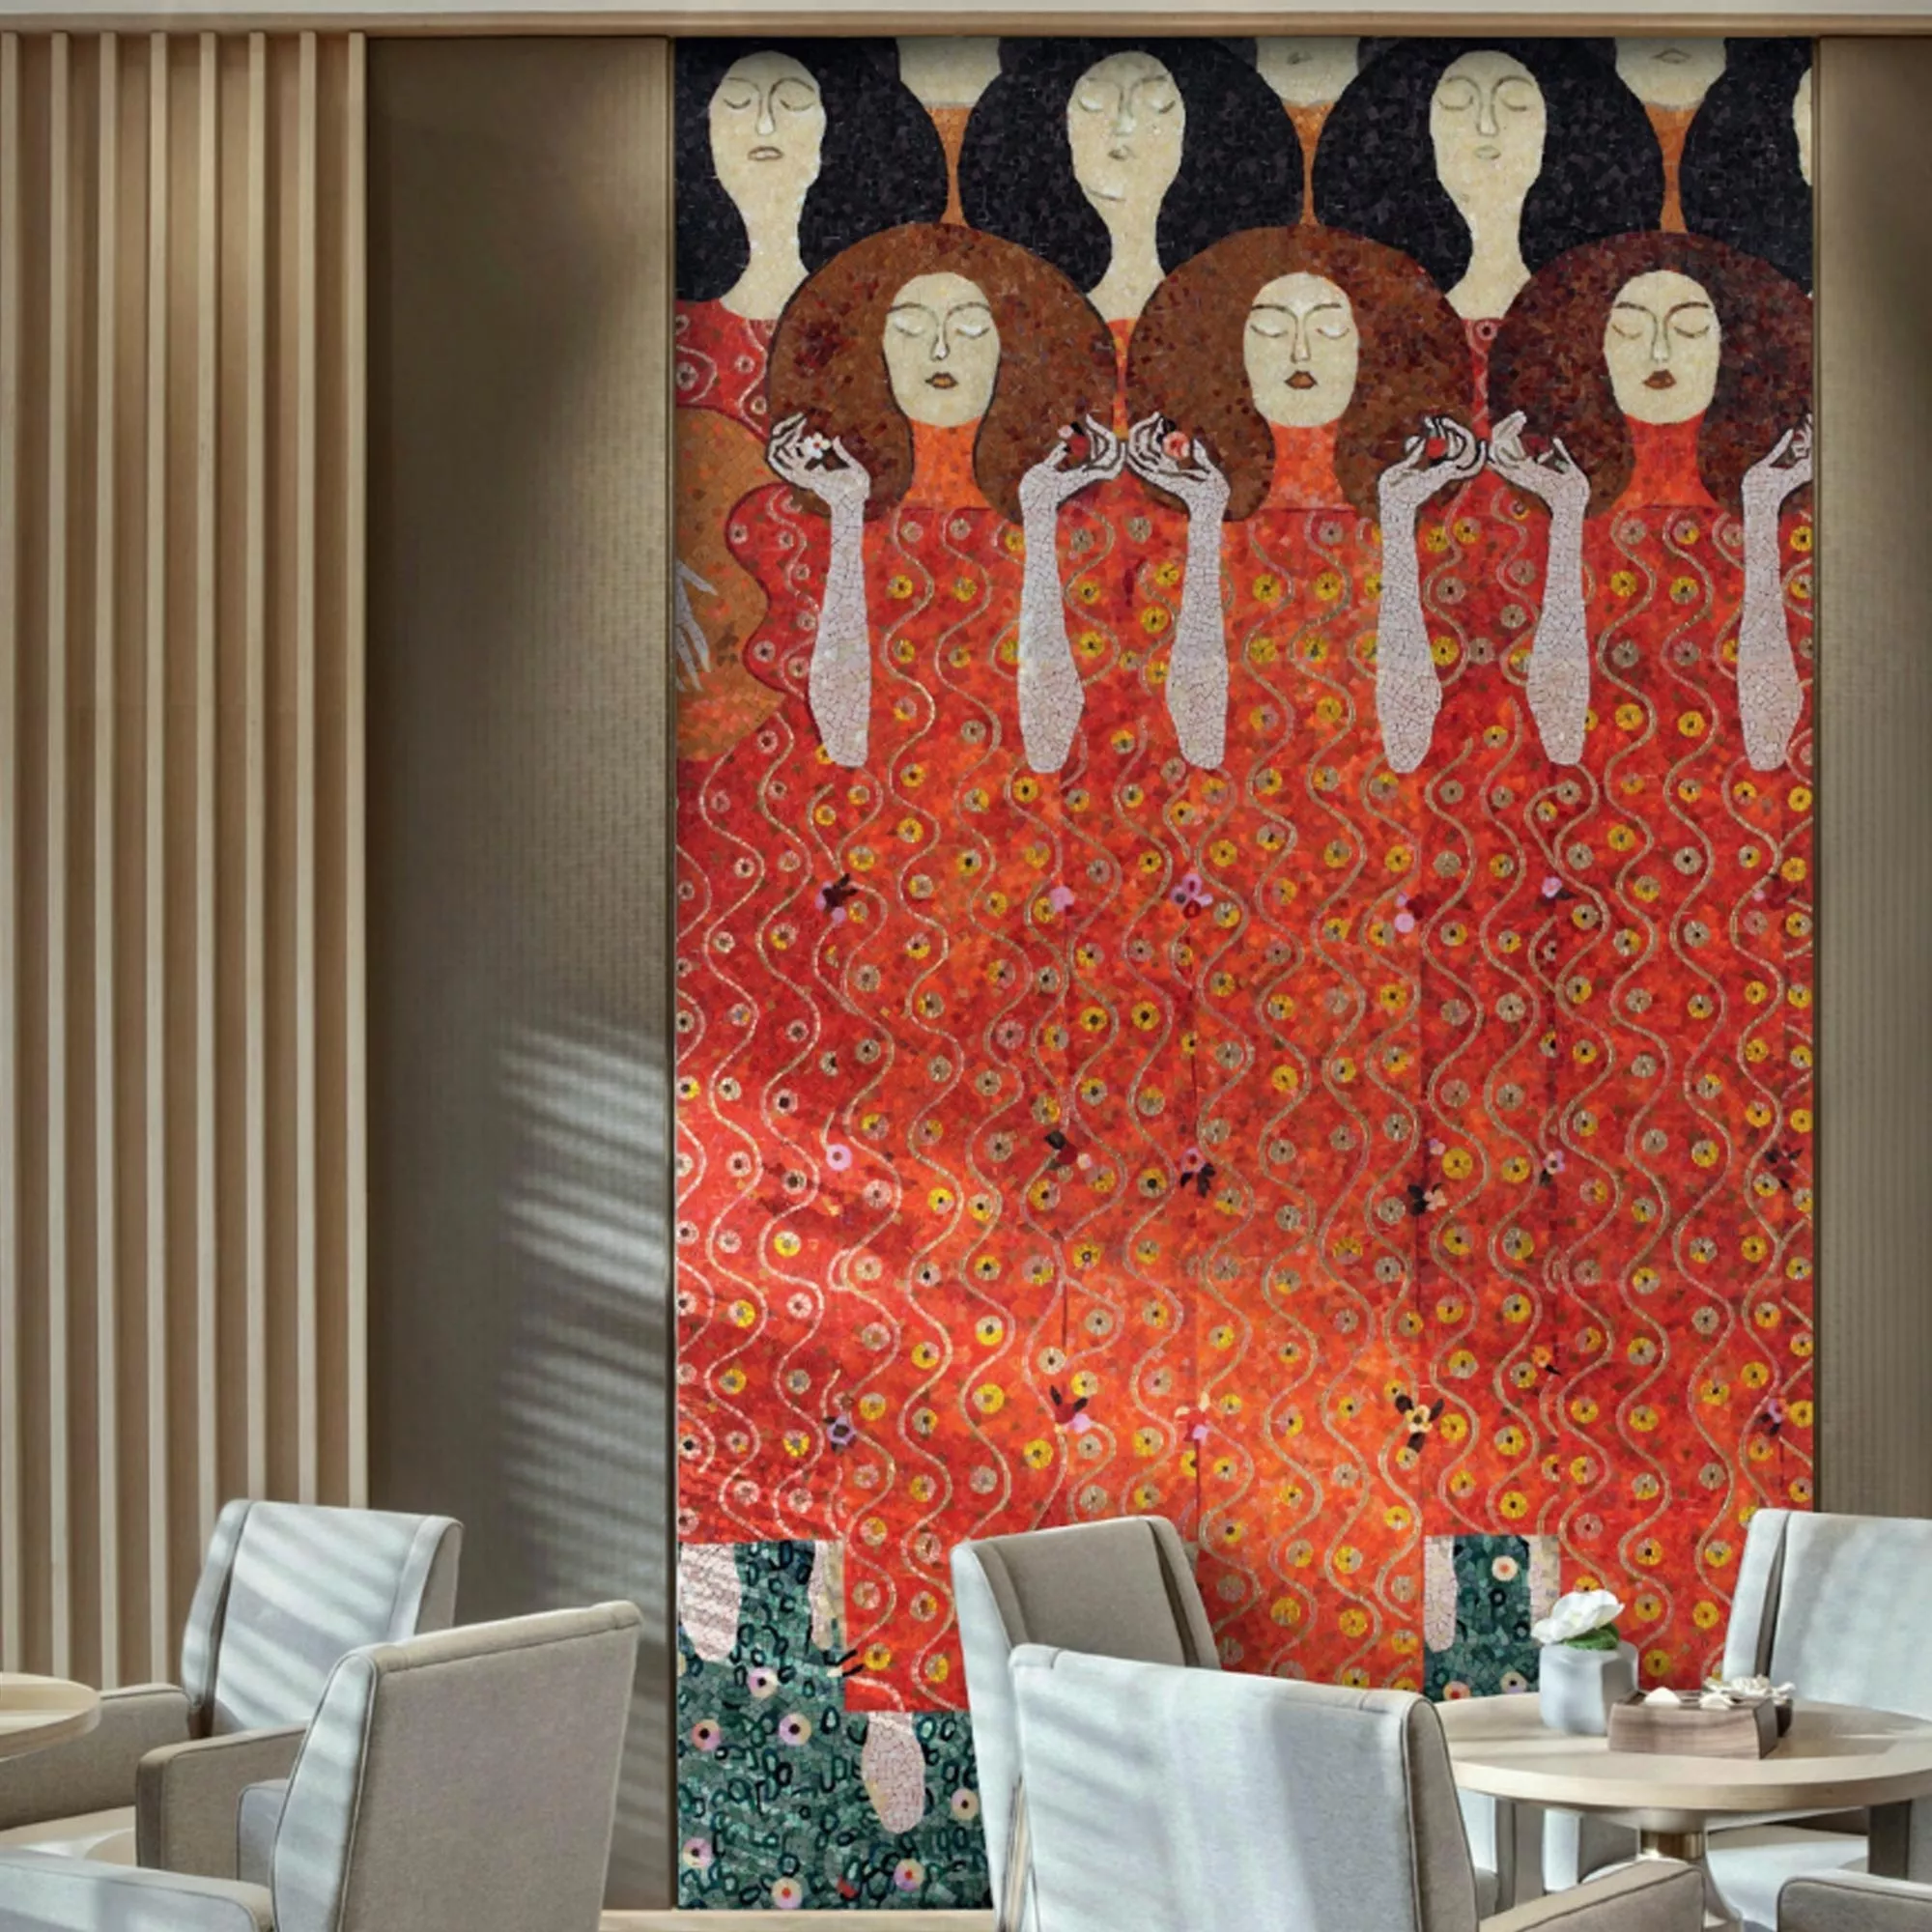 Glass Mosaic Picture Singers 100x240cm